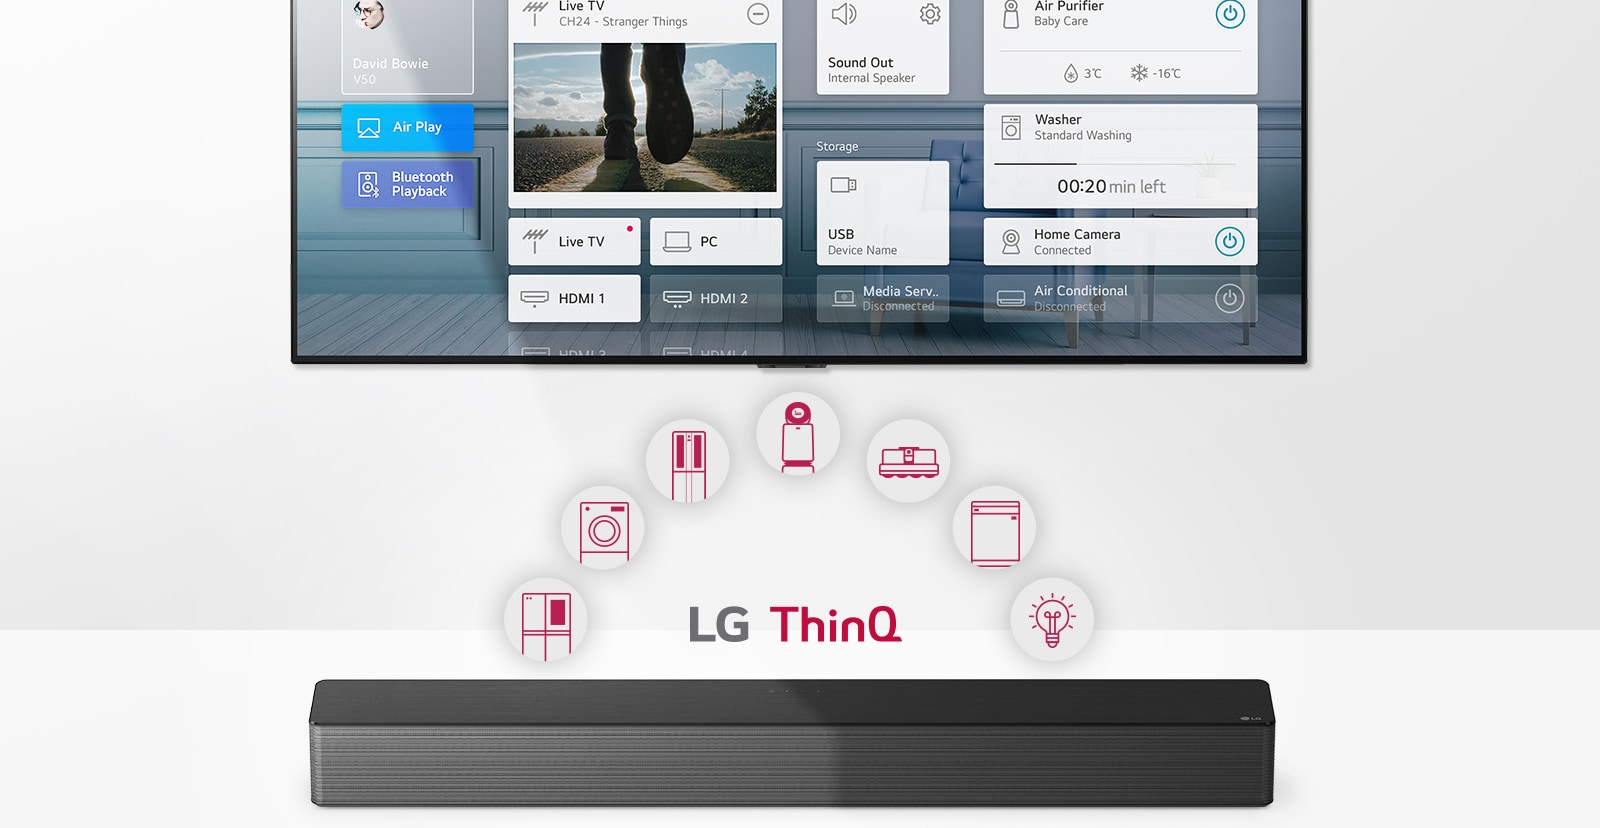 TV is on the wall. LG Soundbar is below the TV. LG ThinQ logo and appliance icons are shown between the TV and LG Soundbar.